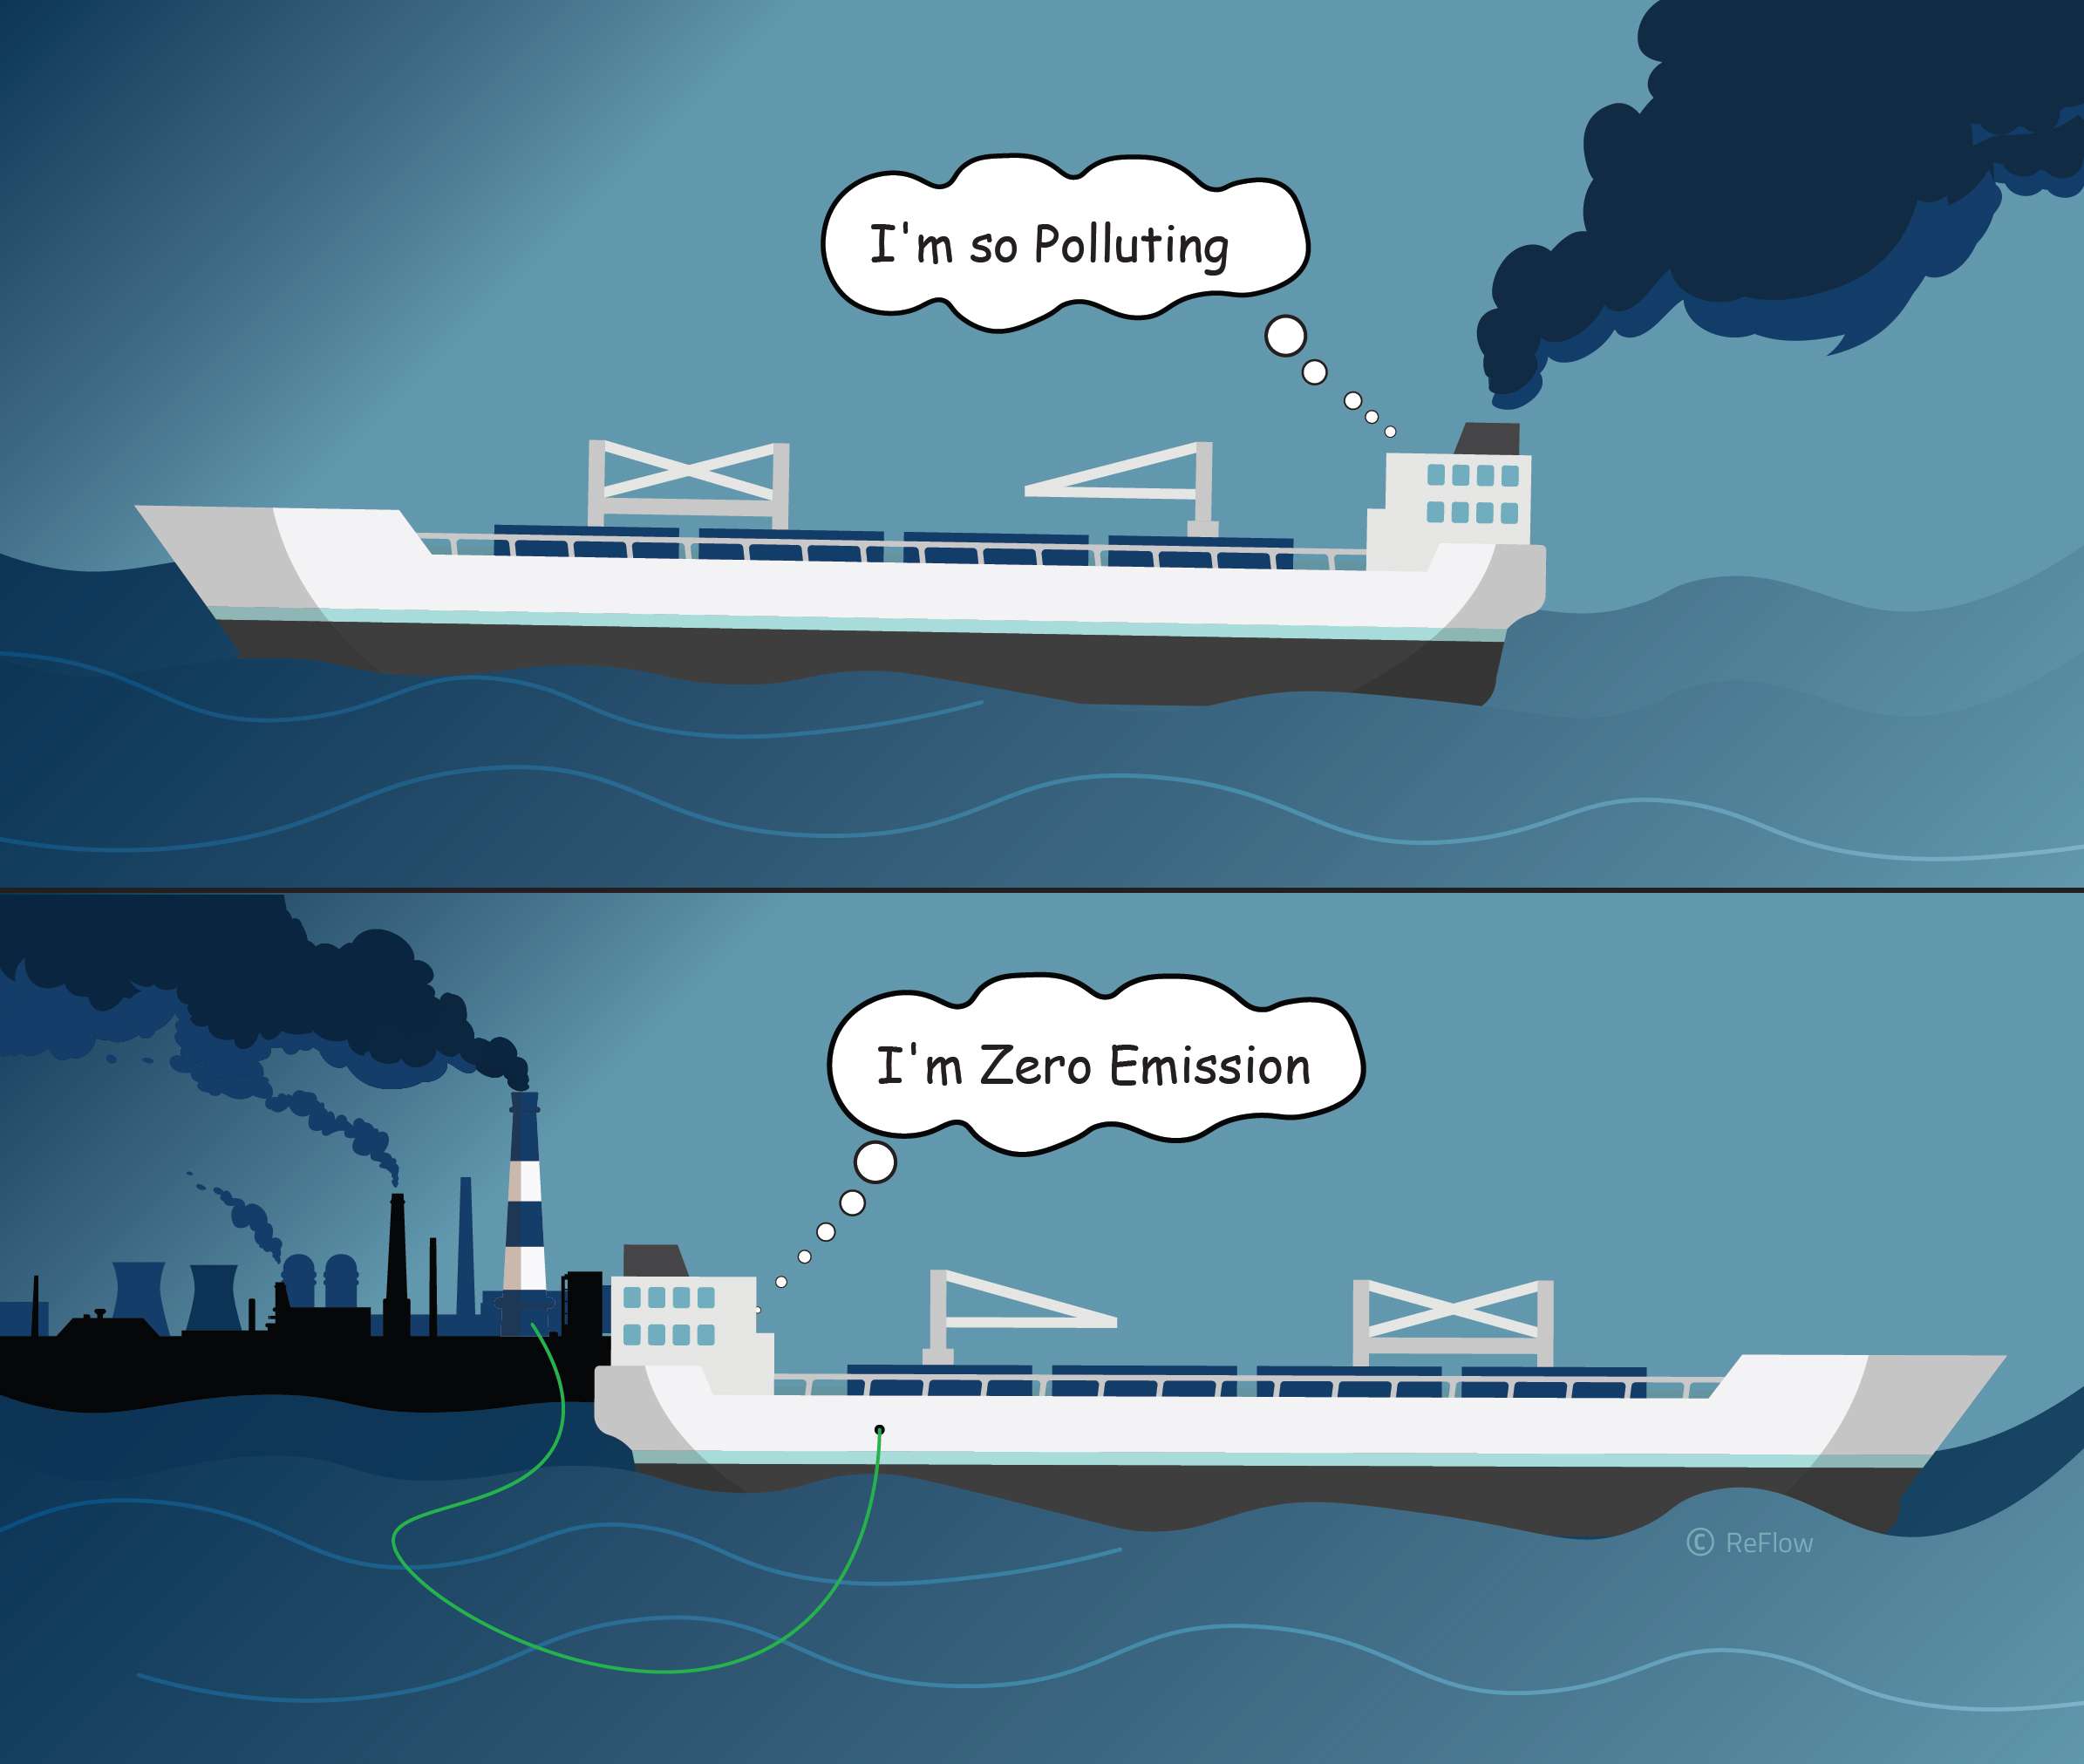 Why is it important to consider a product’s or vessel’s lifecycle emissions data when making green claims?